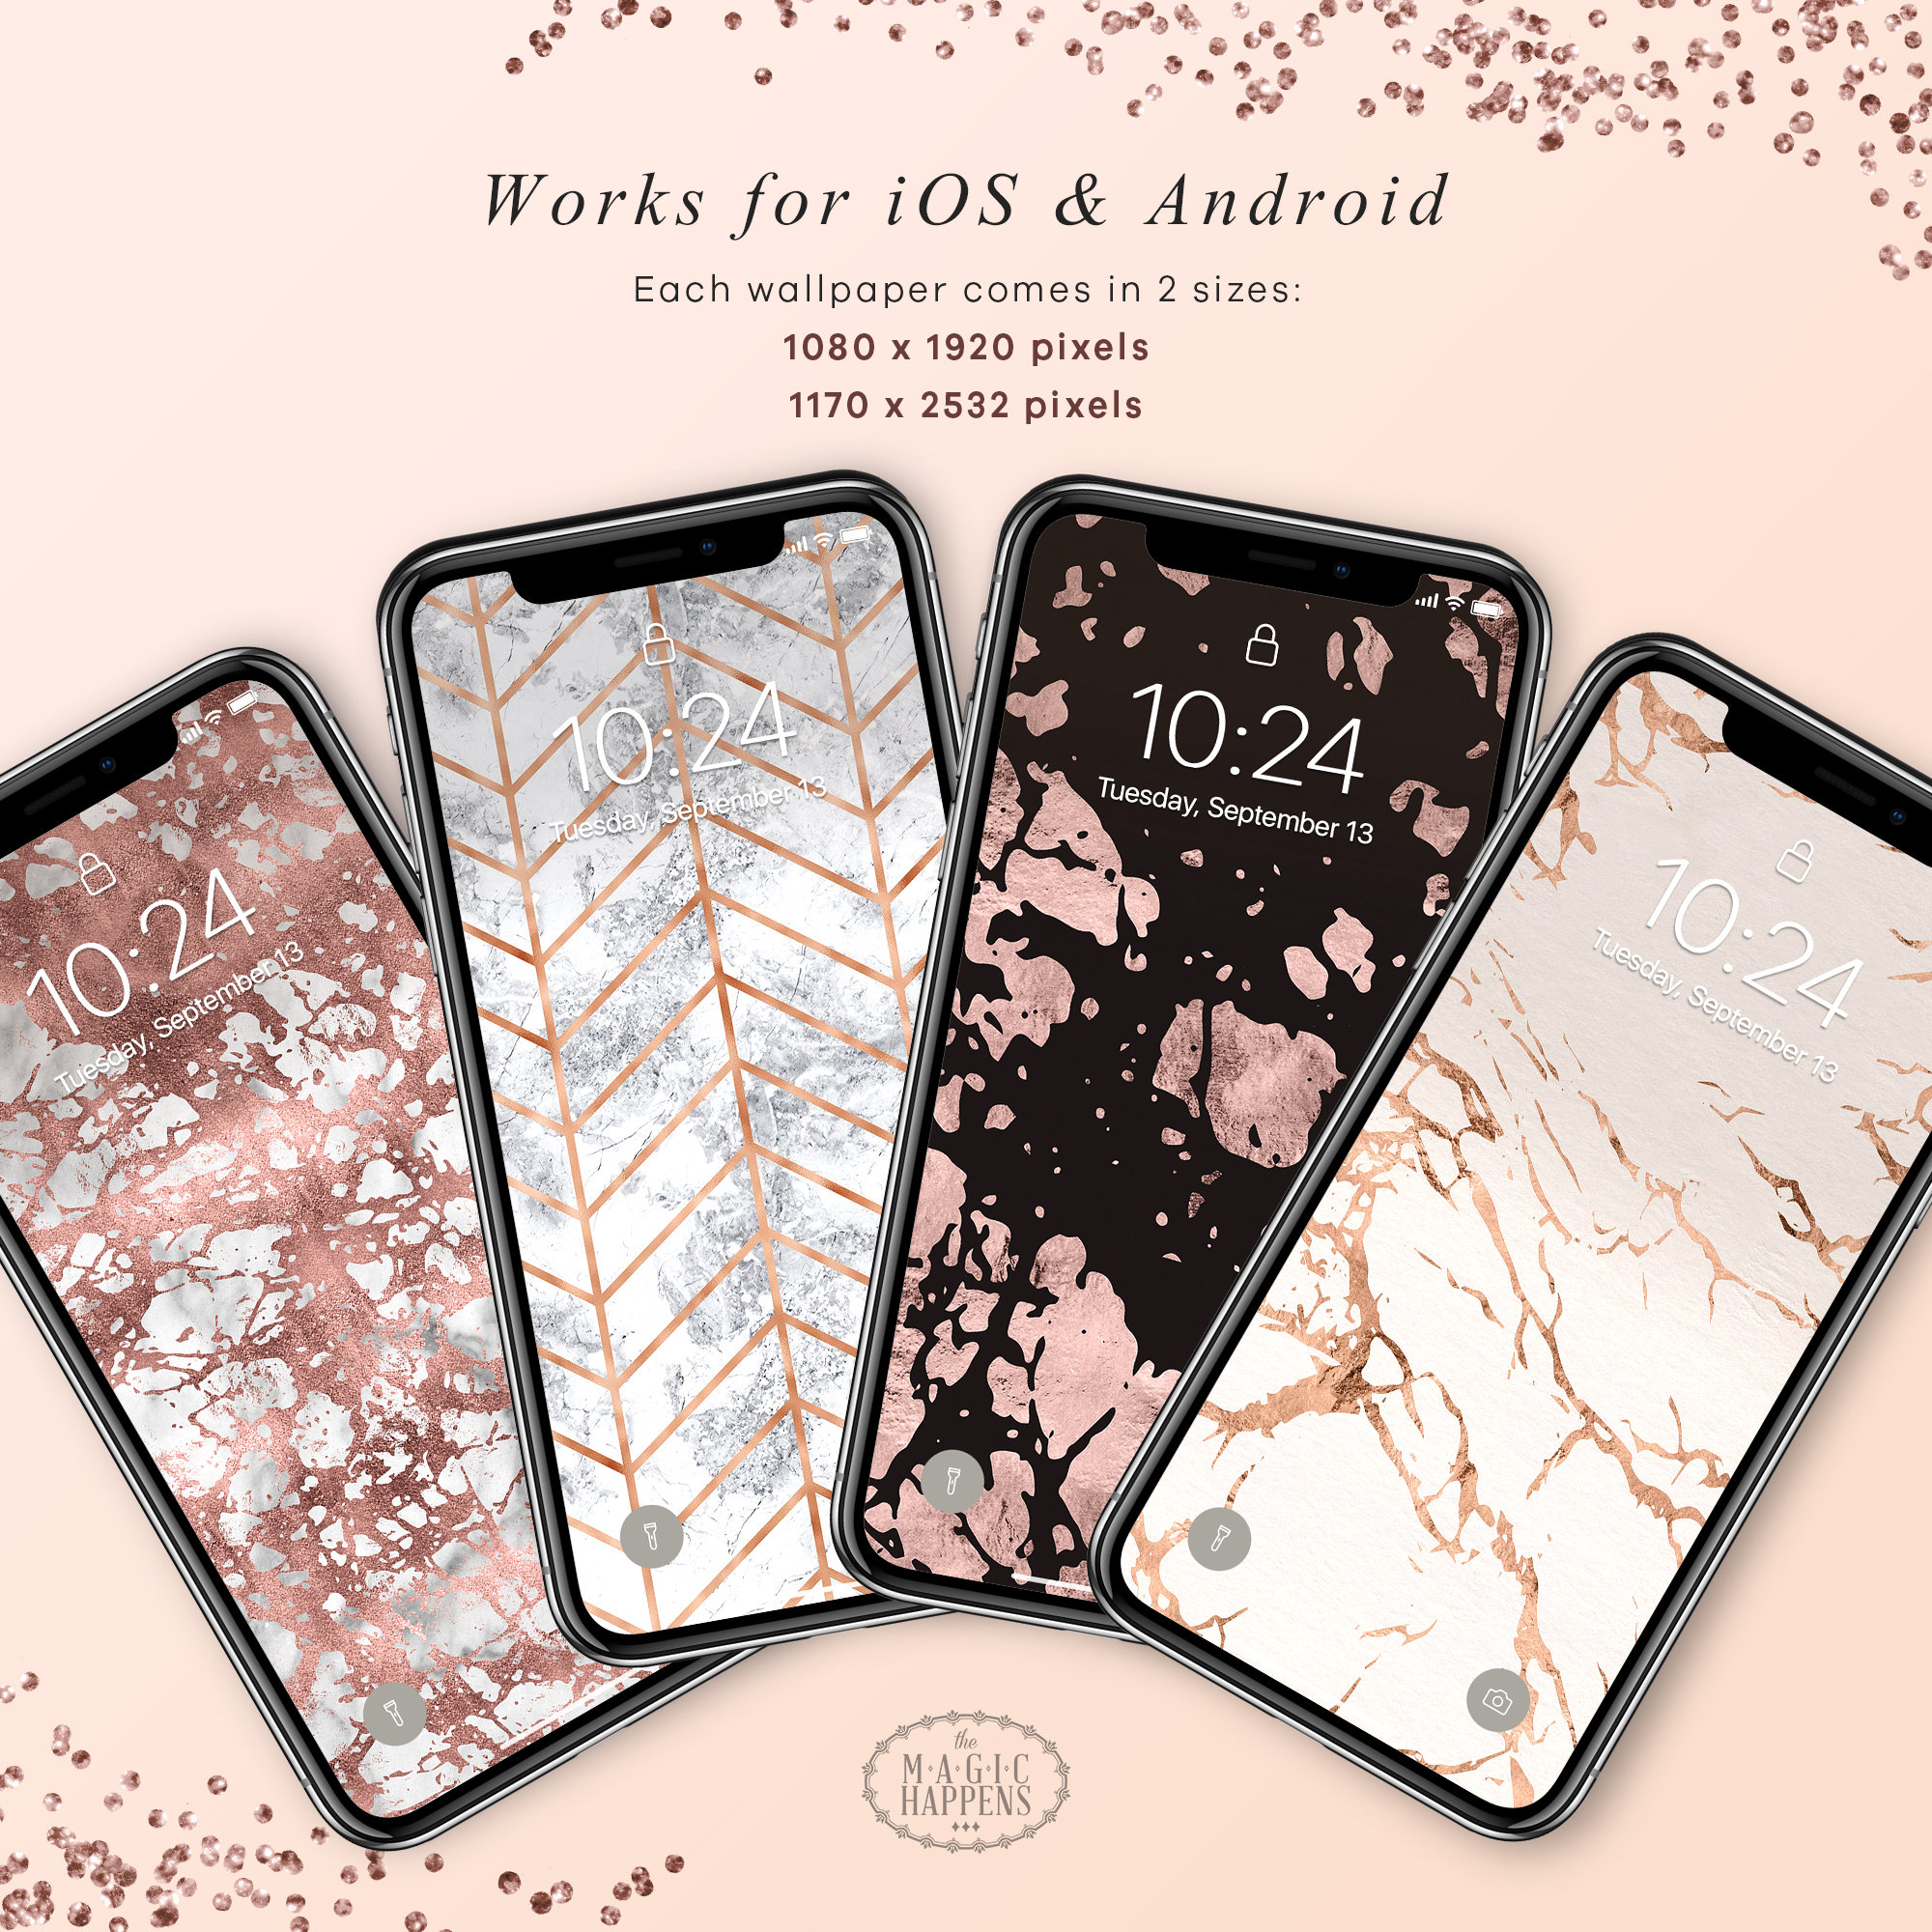 Premium AI Image  Red marble wallpapers that are perfect for iphone xs max  wallpaper screen wallpaper wallpaper backgrounds iphone wallpaper wallpaper  backgrounds wallpaper ideas red wall